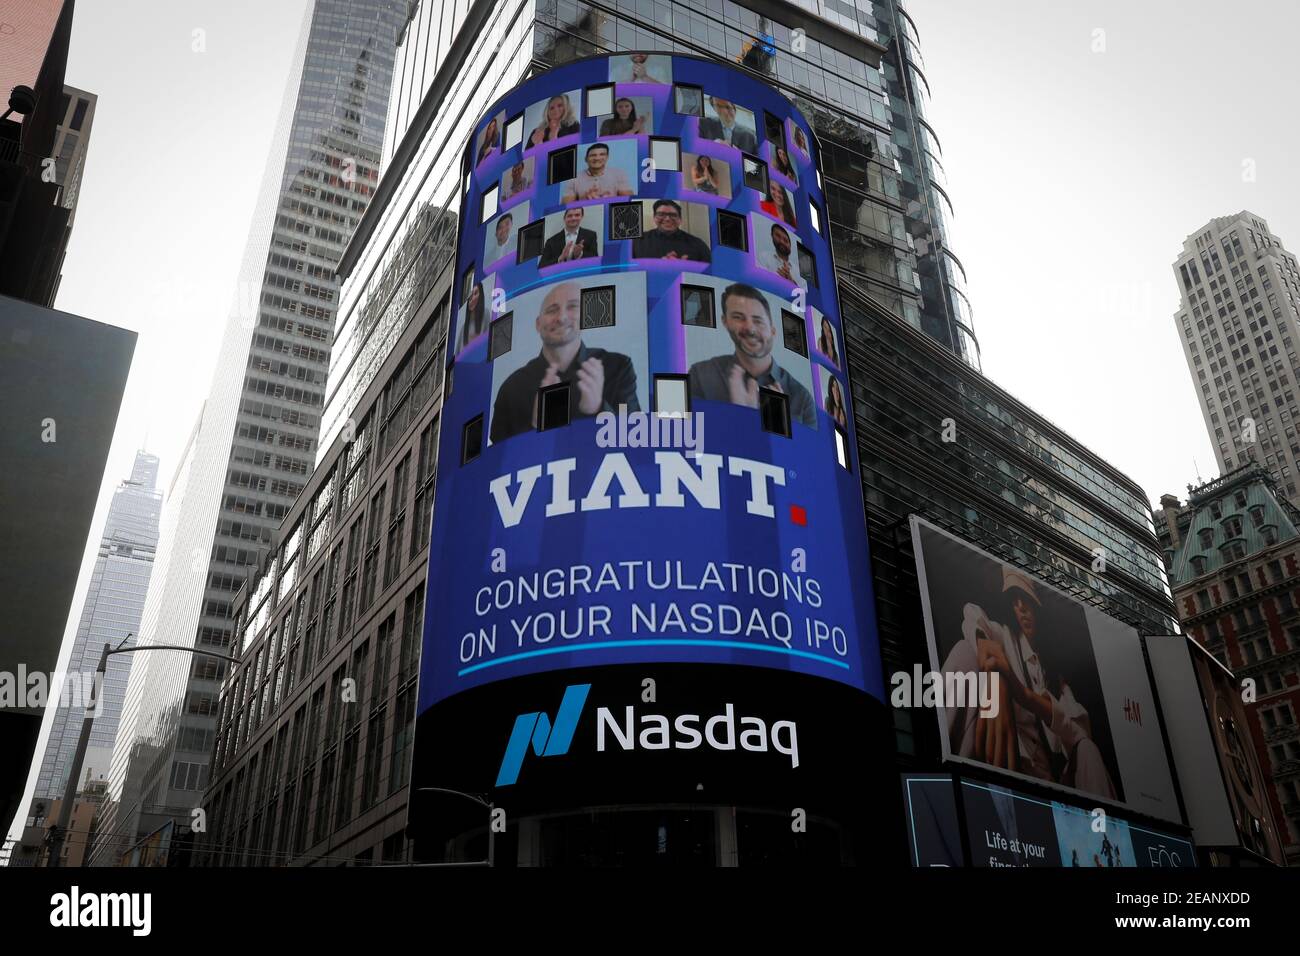 Executives from Viant Technology Inc. (DSP) are pictured on the display outside the Nasdaq MarketSite in Times Square during the company's IPO in New York City, New York, U.S., February 10, 2021. REUTERS/Mike Segar Stock Photo